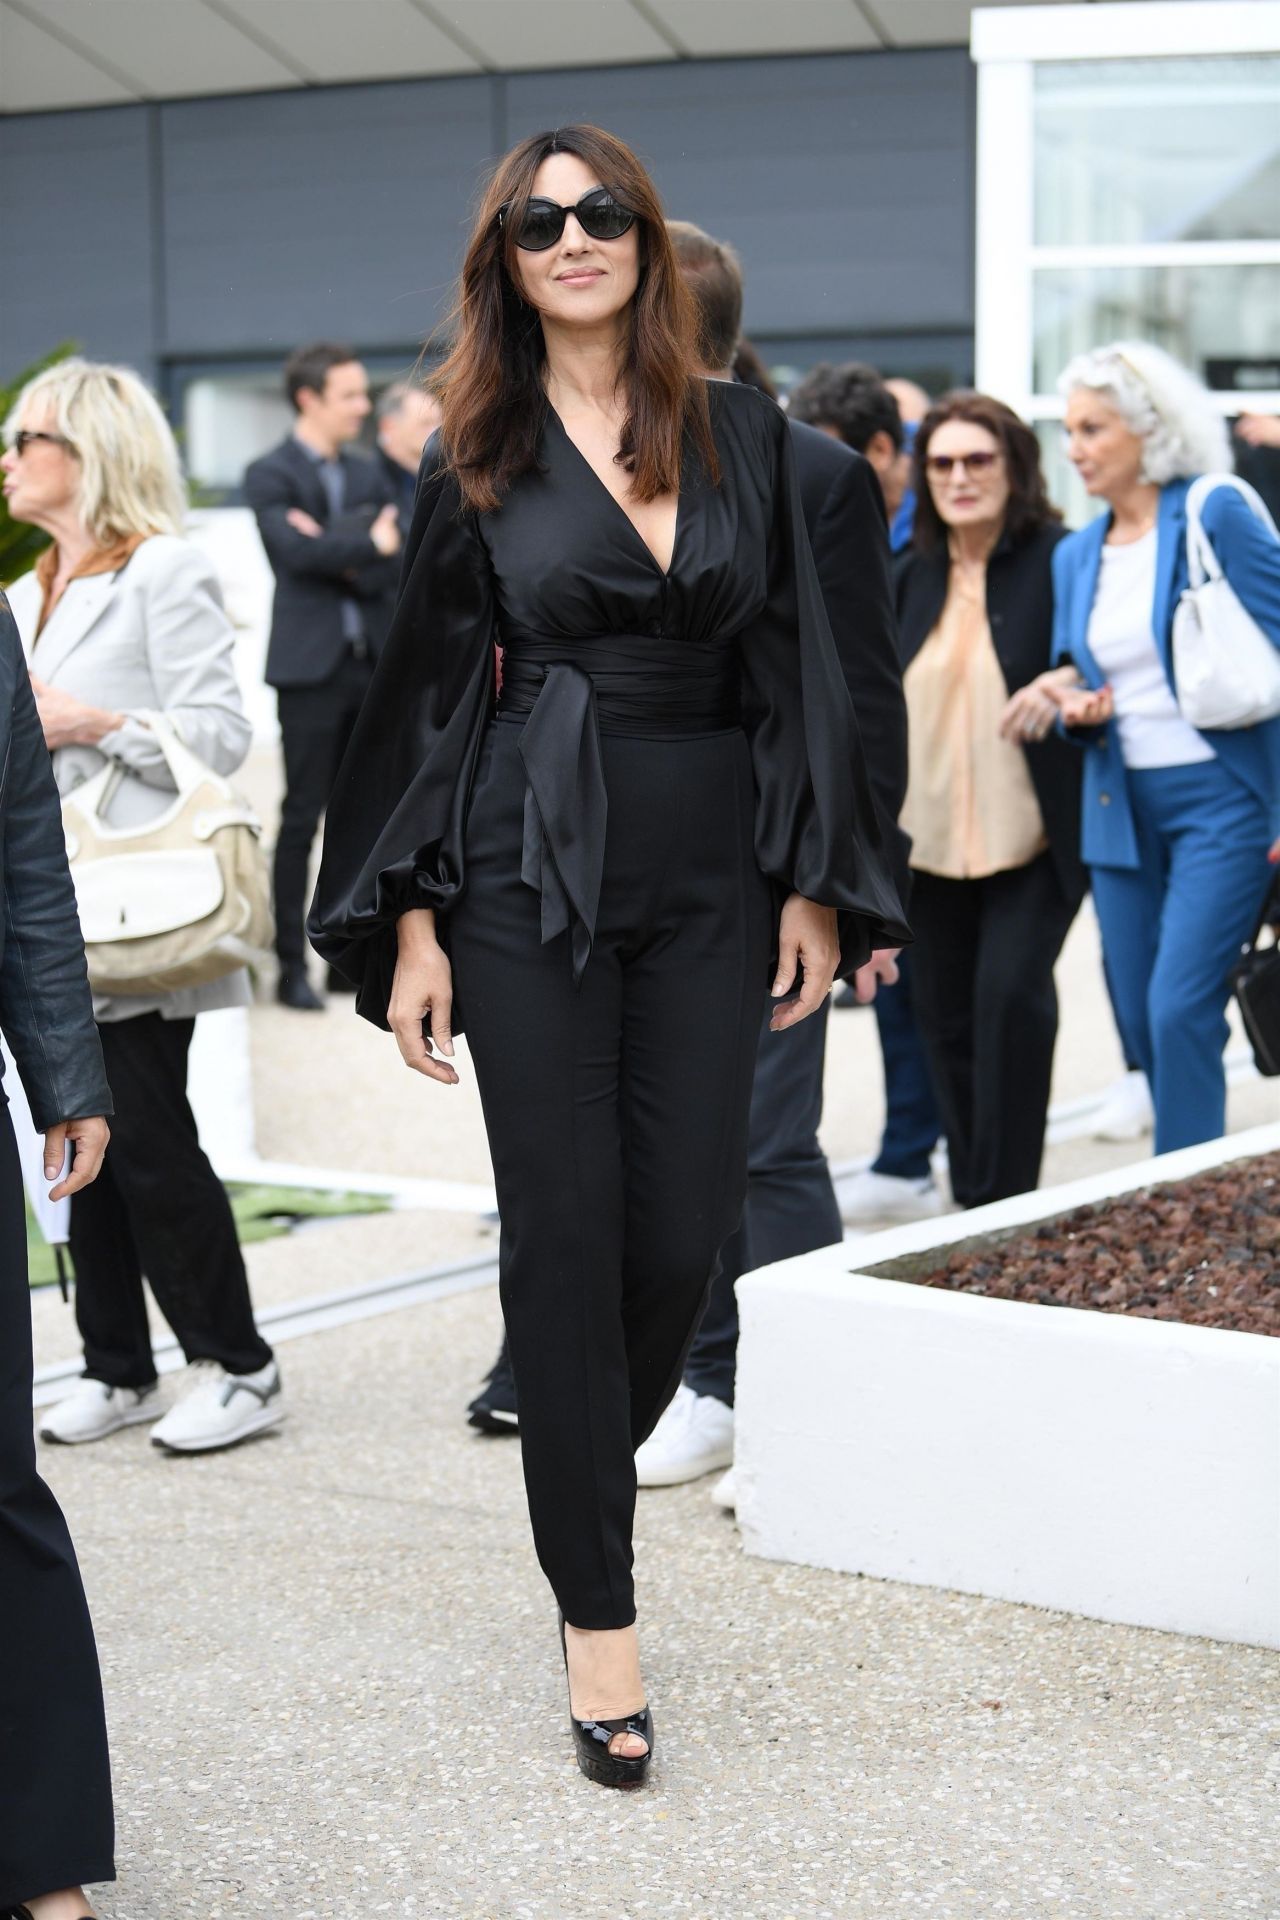 https://celebmafia.com/wp-content/uploads/2019/05/monica-bellucci-the-best-years-of-a-life-photocall-at-cannes-film-festival-5.jpg